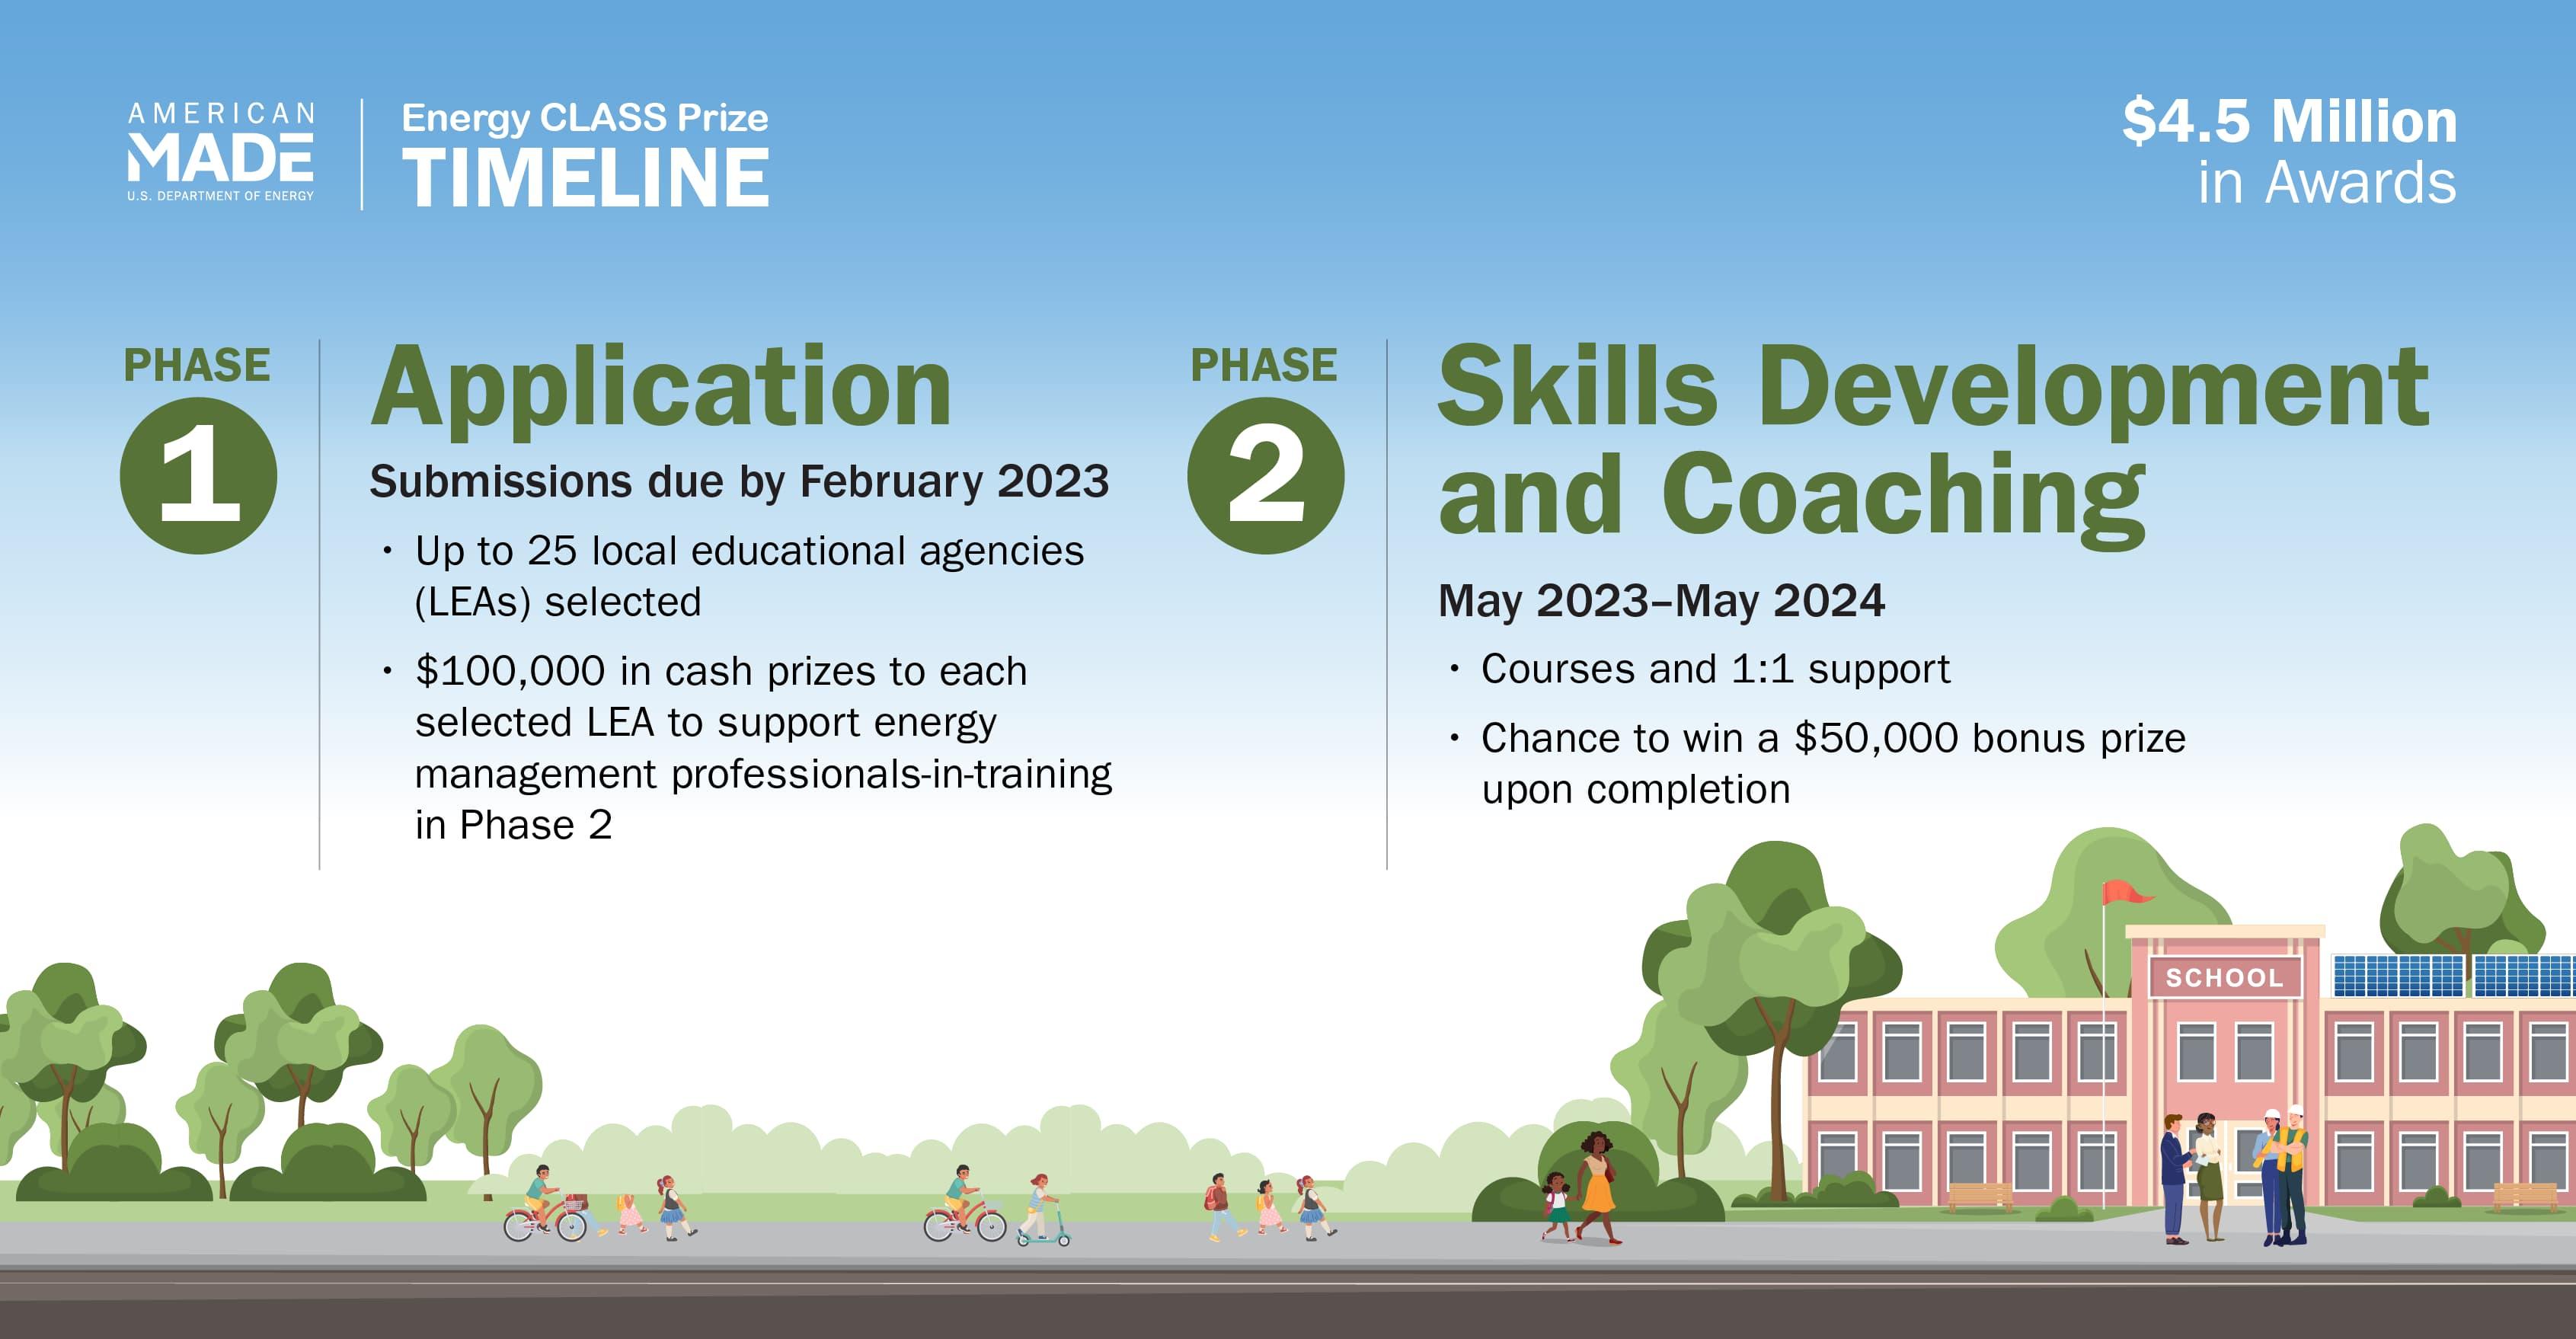 Energy Class Prize Timeline. Phase 1: Application - Opens in November 2022, submissions due by February 2023. Up to 25 local educational agencies (LEAs) selected. $100,000 in cash prizes to each selected LEA to support energy management professionals-in-training in Phase 2. Phase 2: Skills Development & Coaching. May 2023 - May 2024. Courses and 1:1 support over a 12-month period. Chance to win a $50,000 bonus prize upon completion.